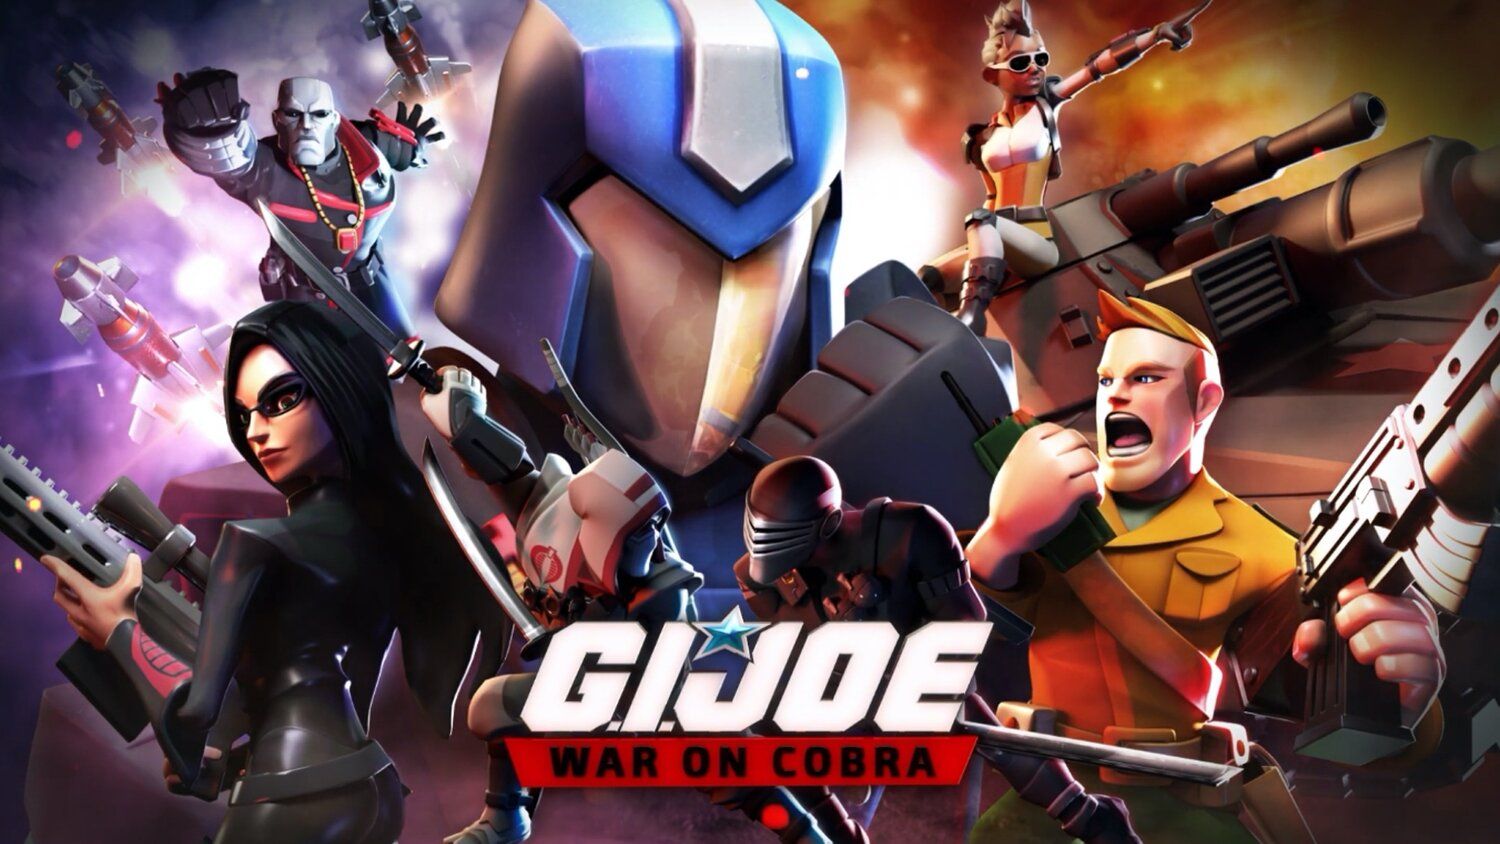 G.I. JOE: WAR ON COBRA Is Available For Pre Registration Now